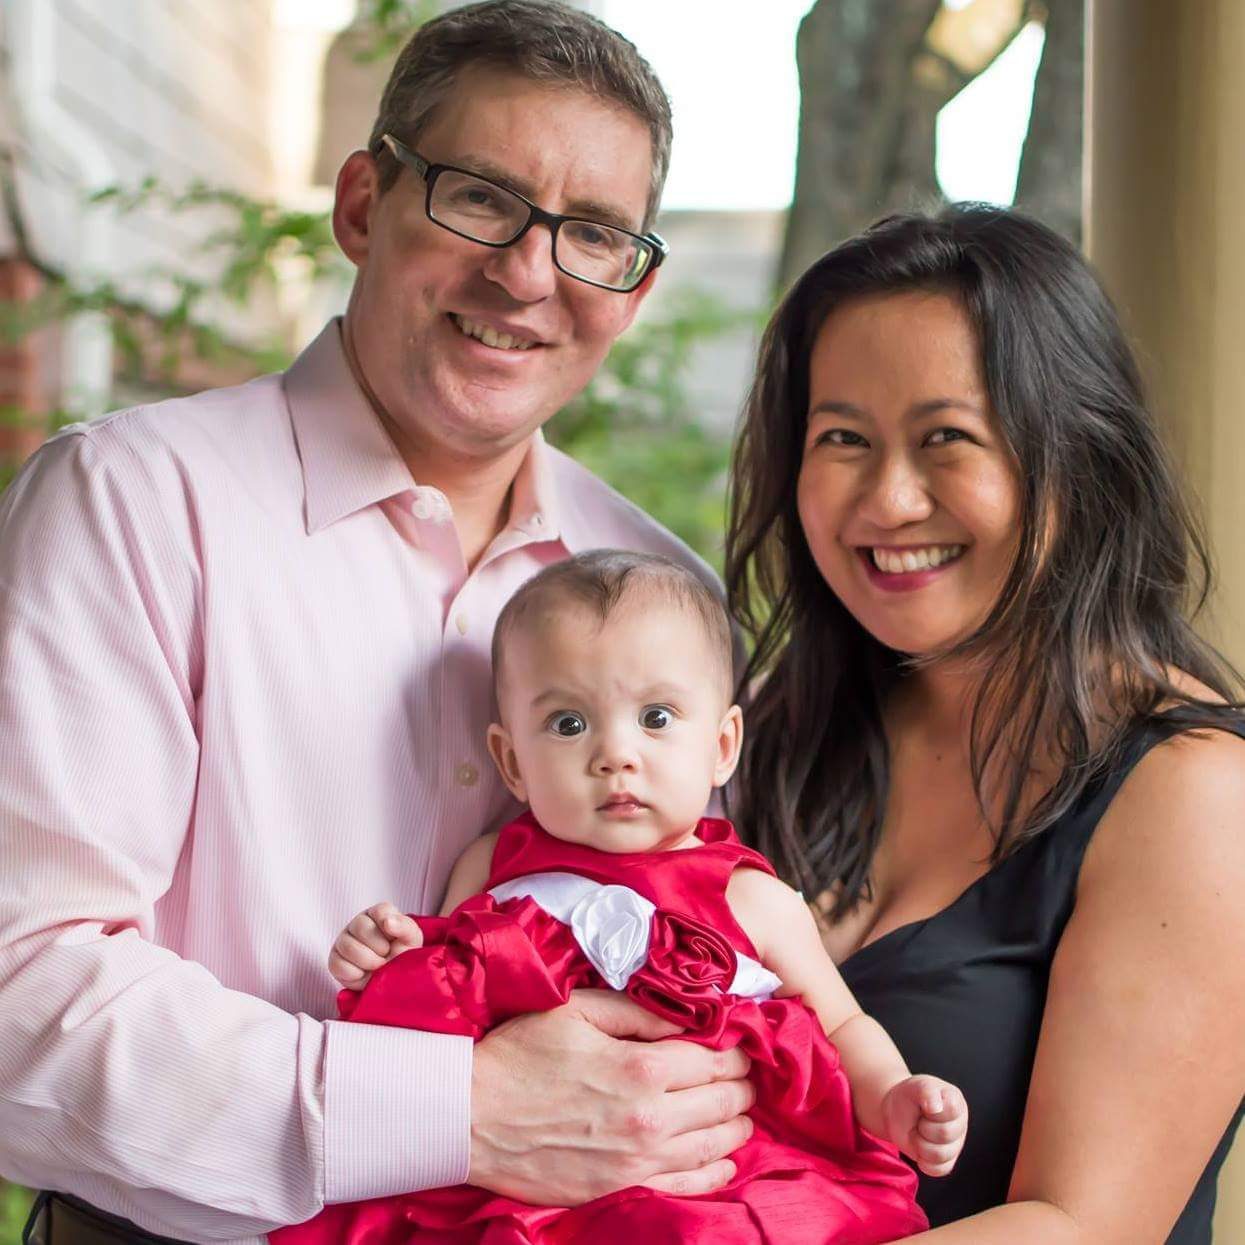 The author (R) with her American husband and baby. 